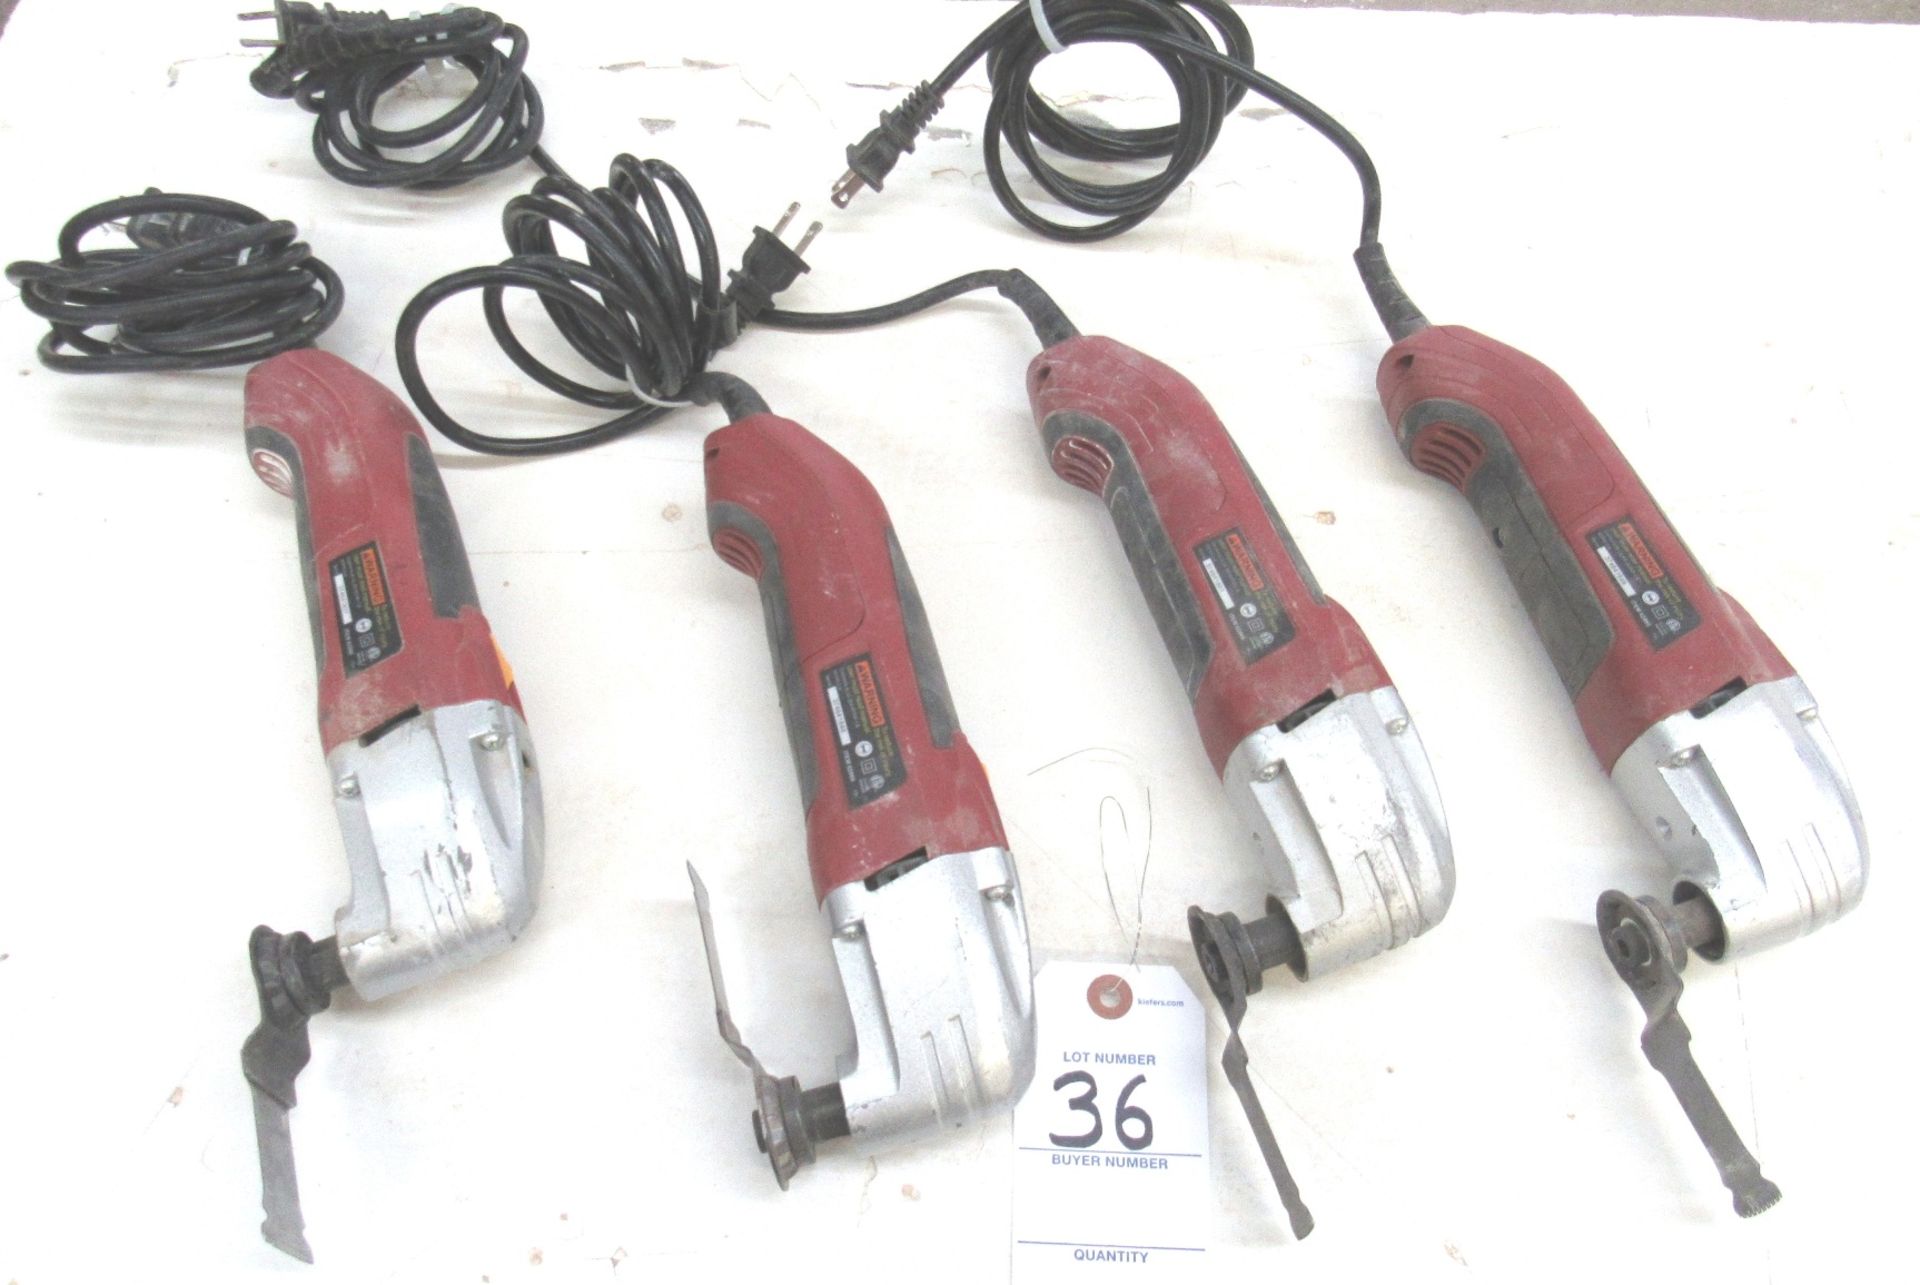 (4) Chicago Electric 21,000 RPM Osillating MultiFunction Power Tool